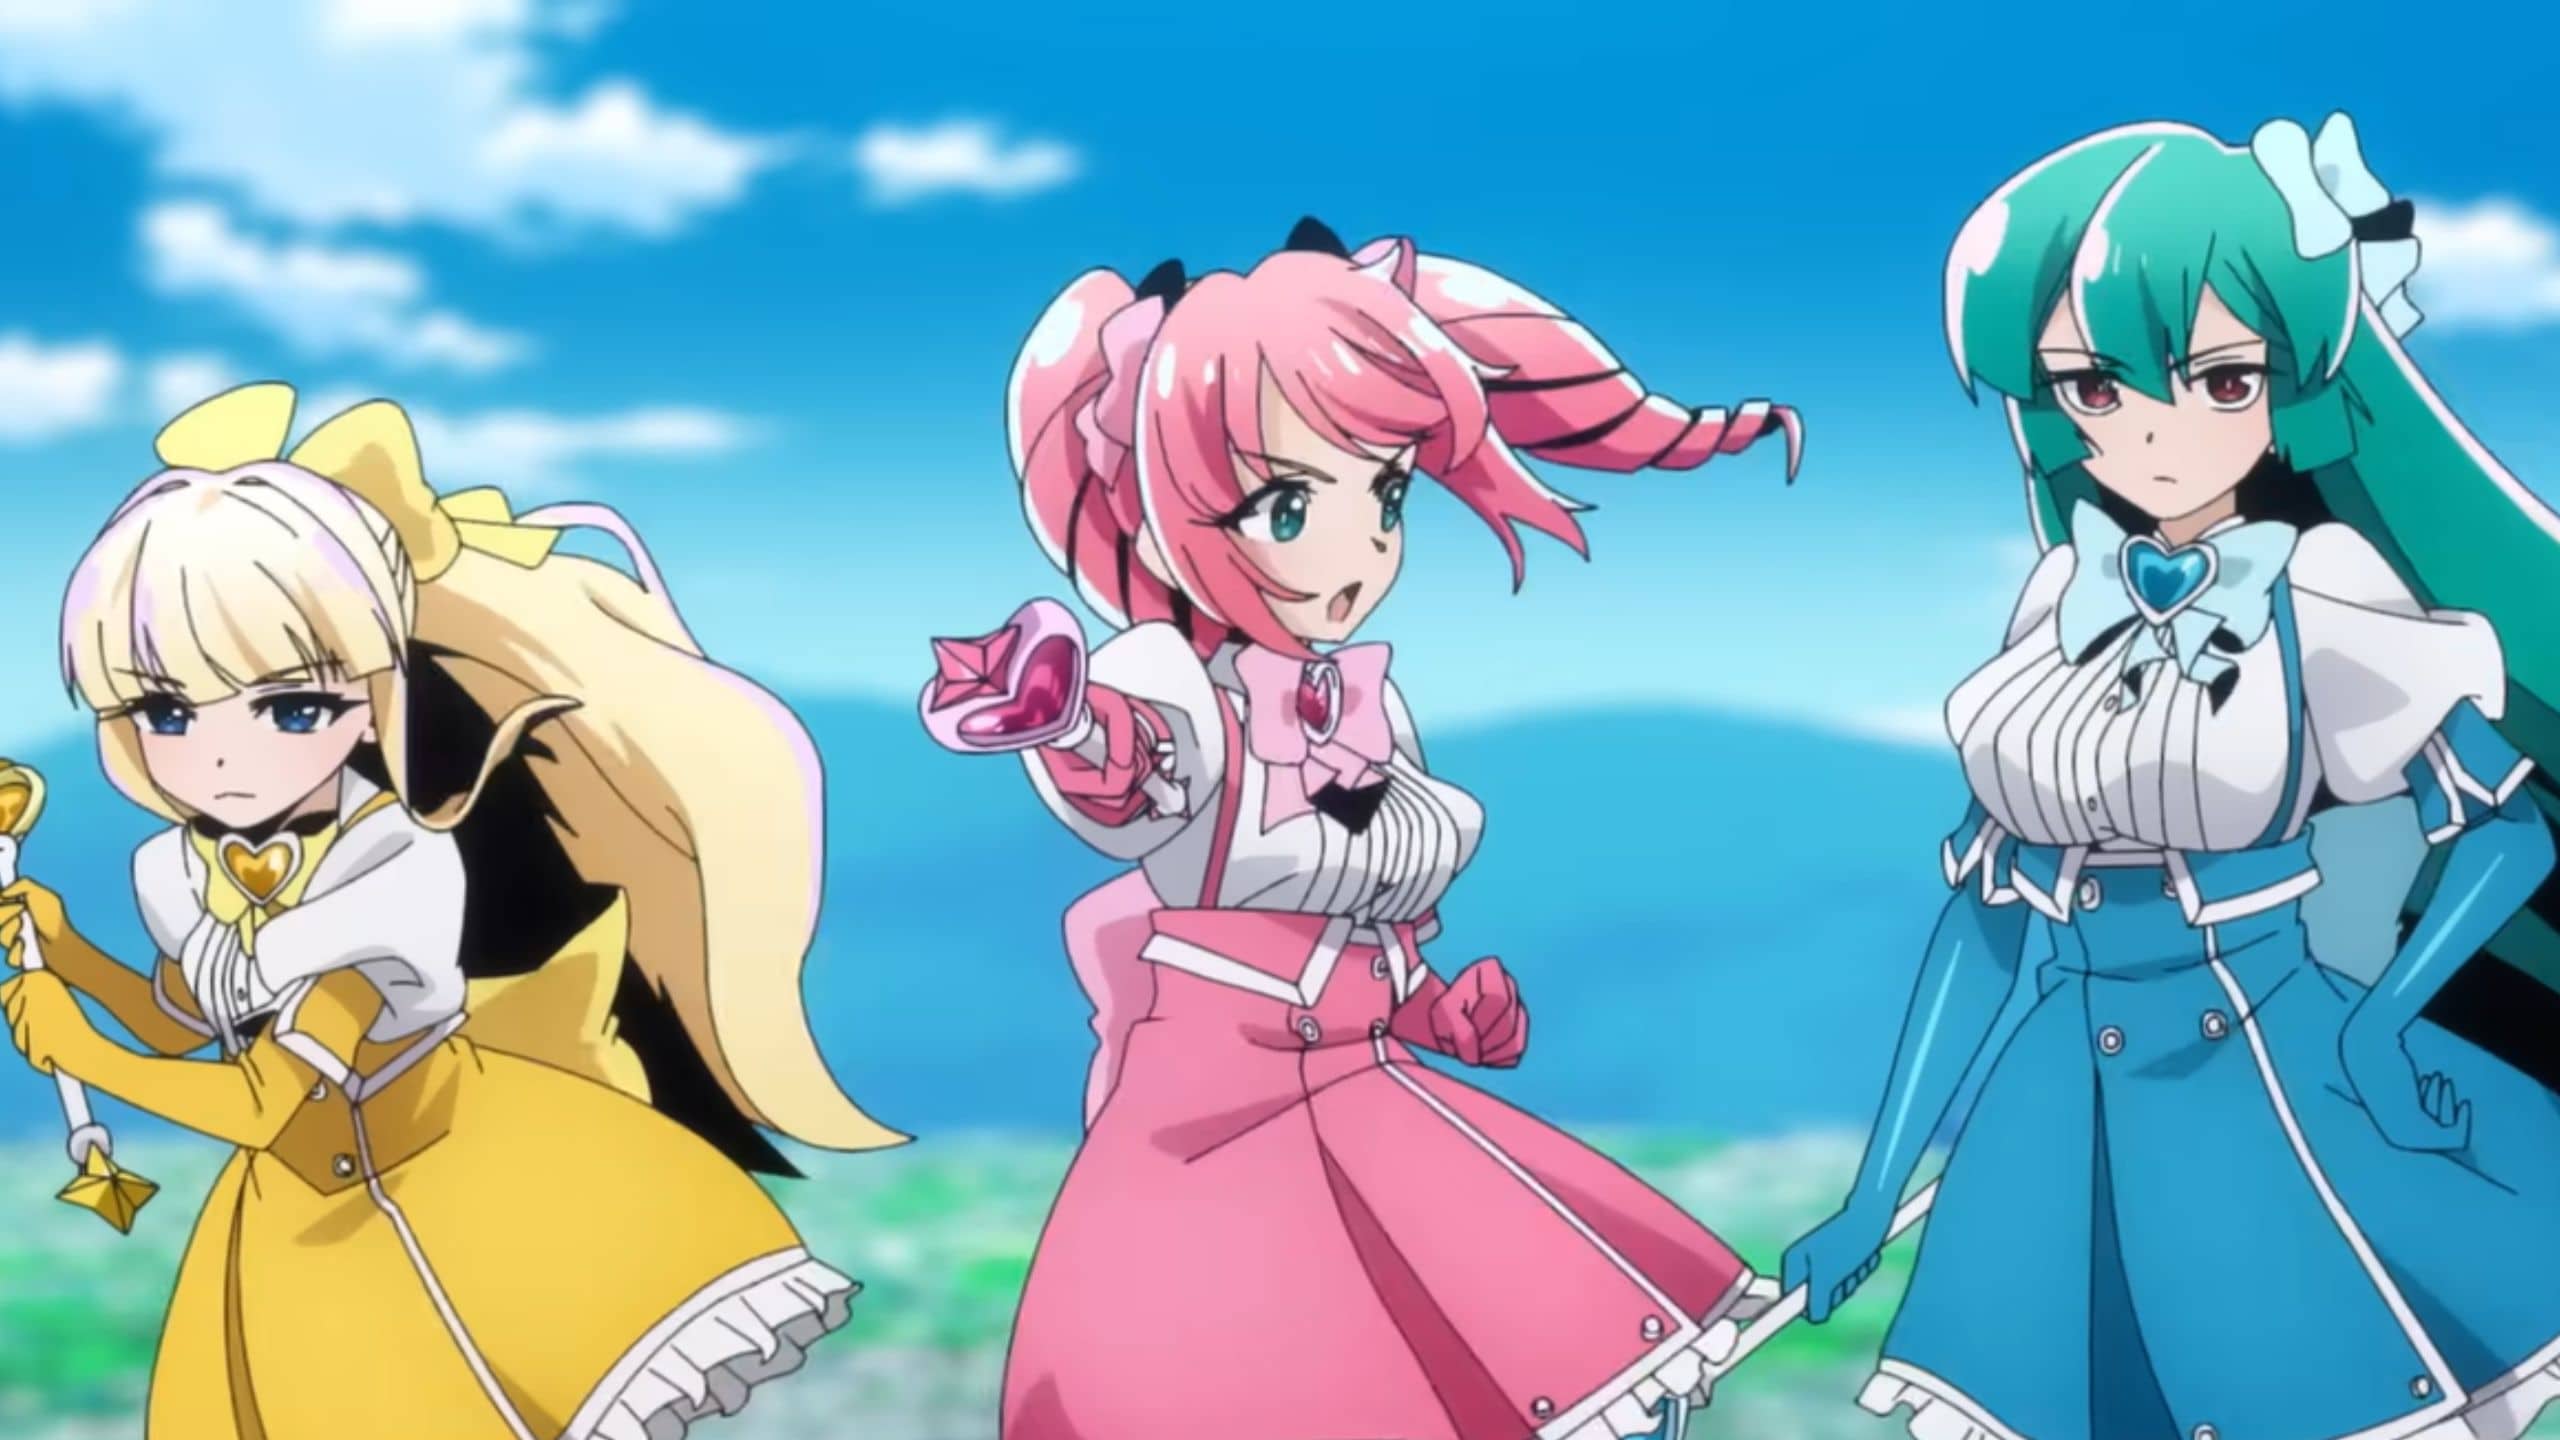 Gushing Over Magical Girls Episode 1 Release Date